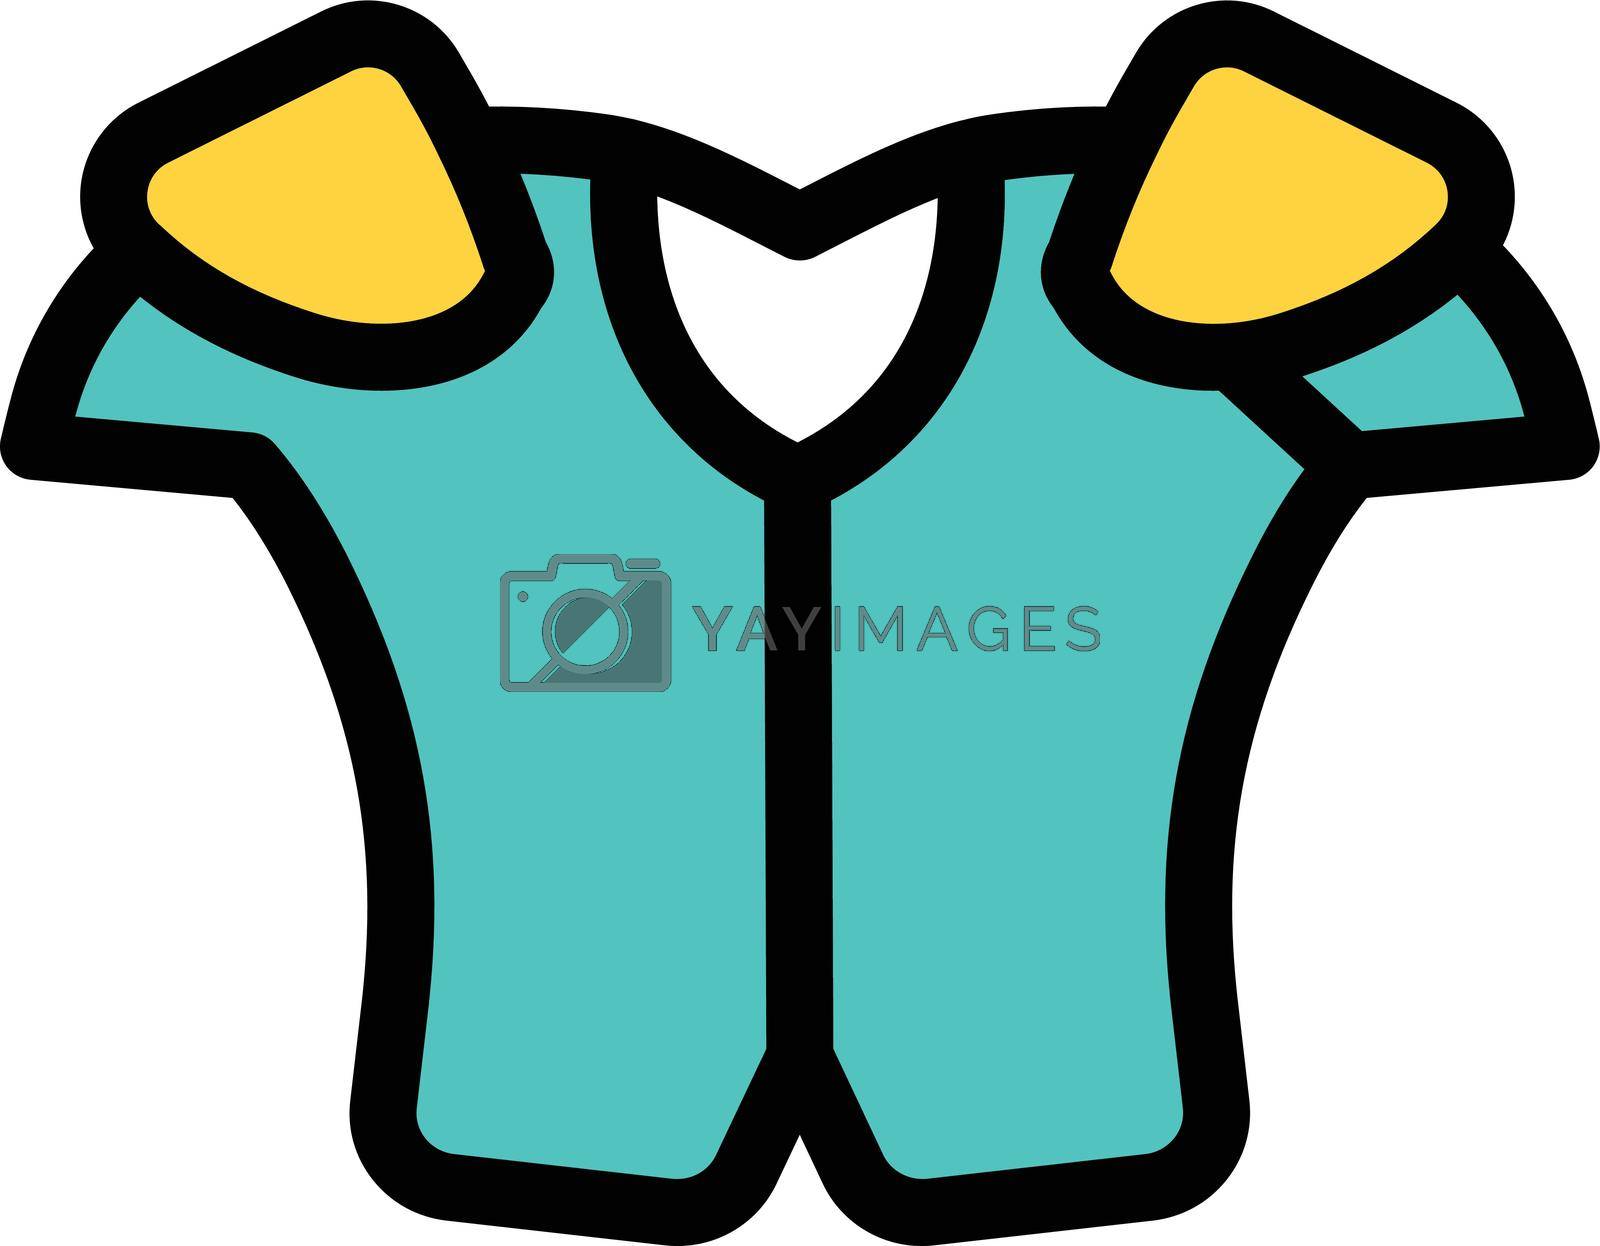 Royalty free image of uniform by vectorstall